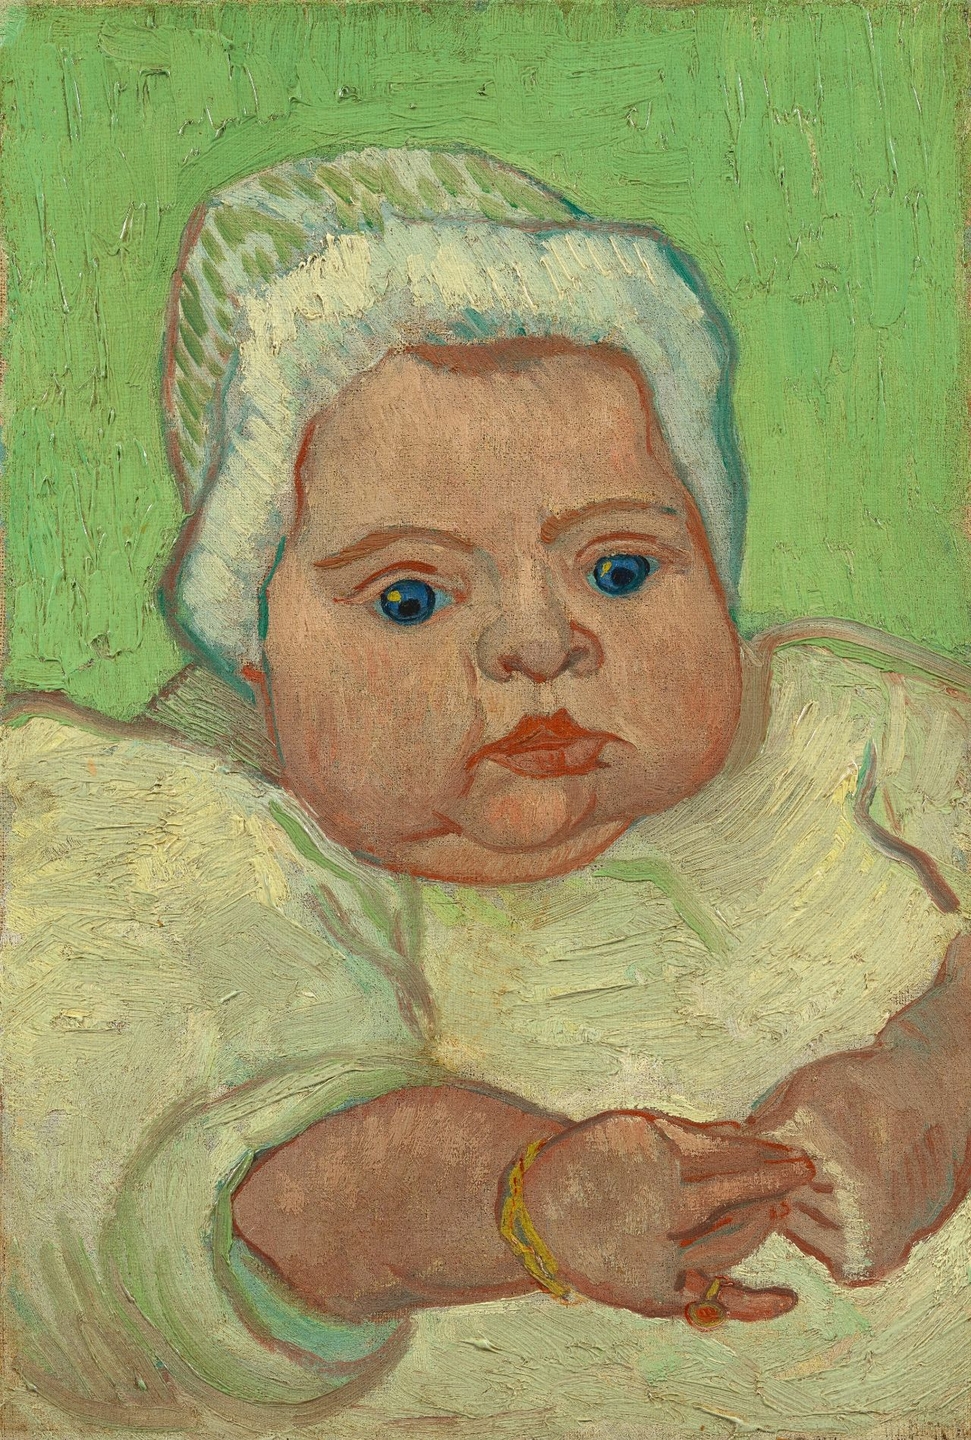 Who resembled Vincent Willem van Gogh as a baby?